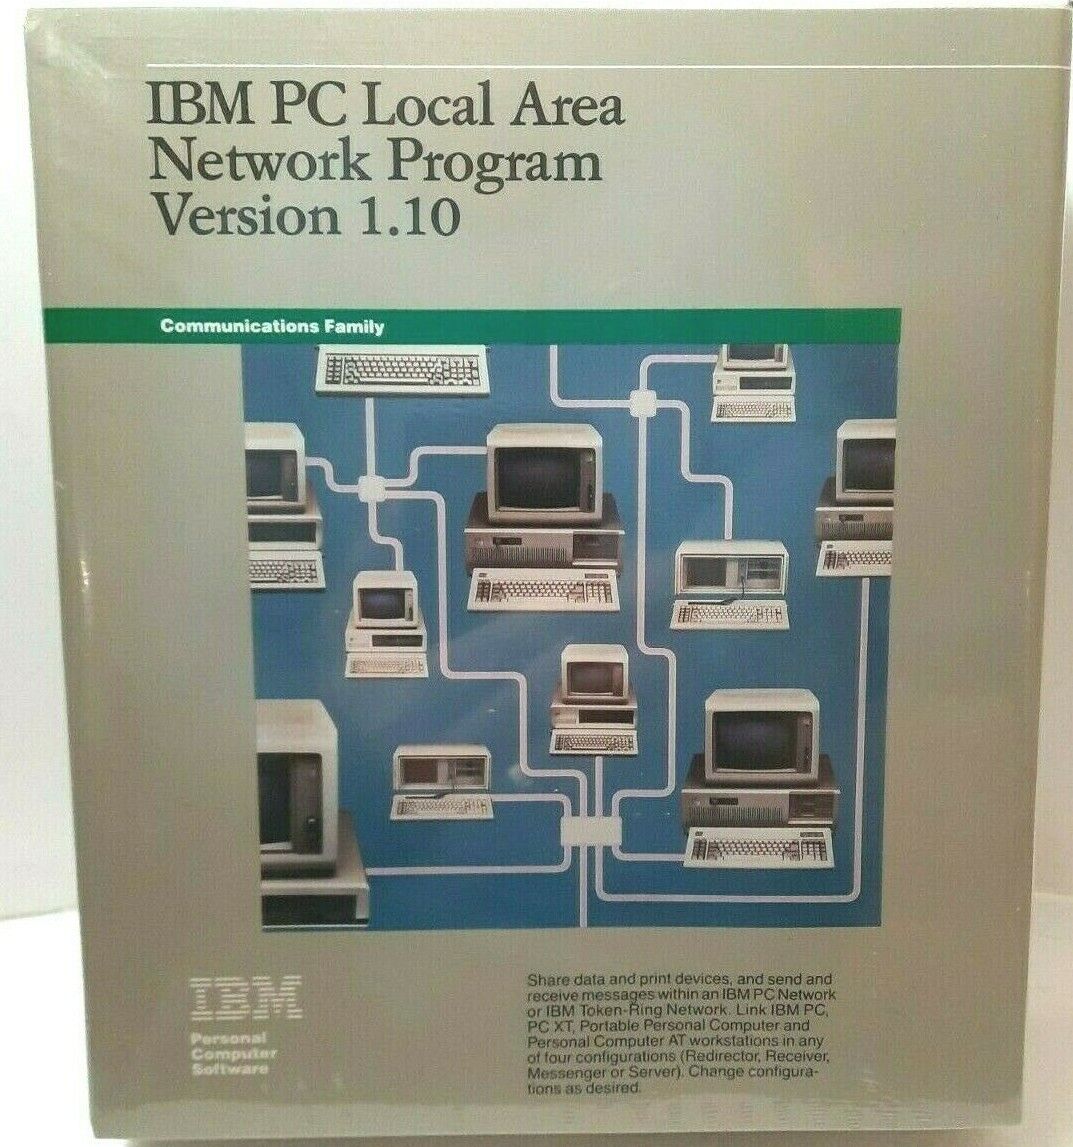 IBM PC Local Area Network Program Version 1.10 - (1985) - New old Stock Sealed.